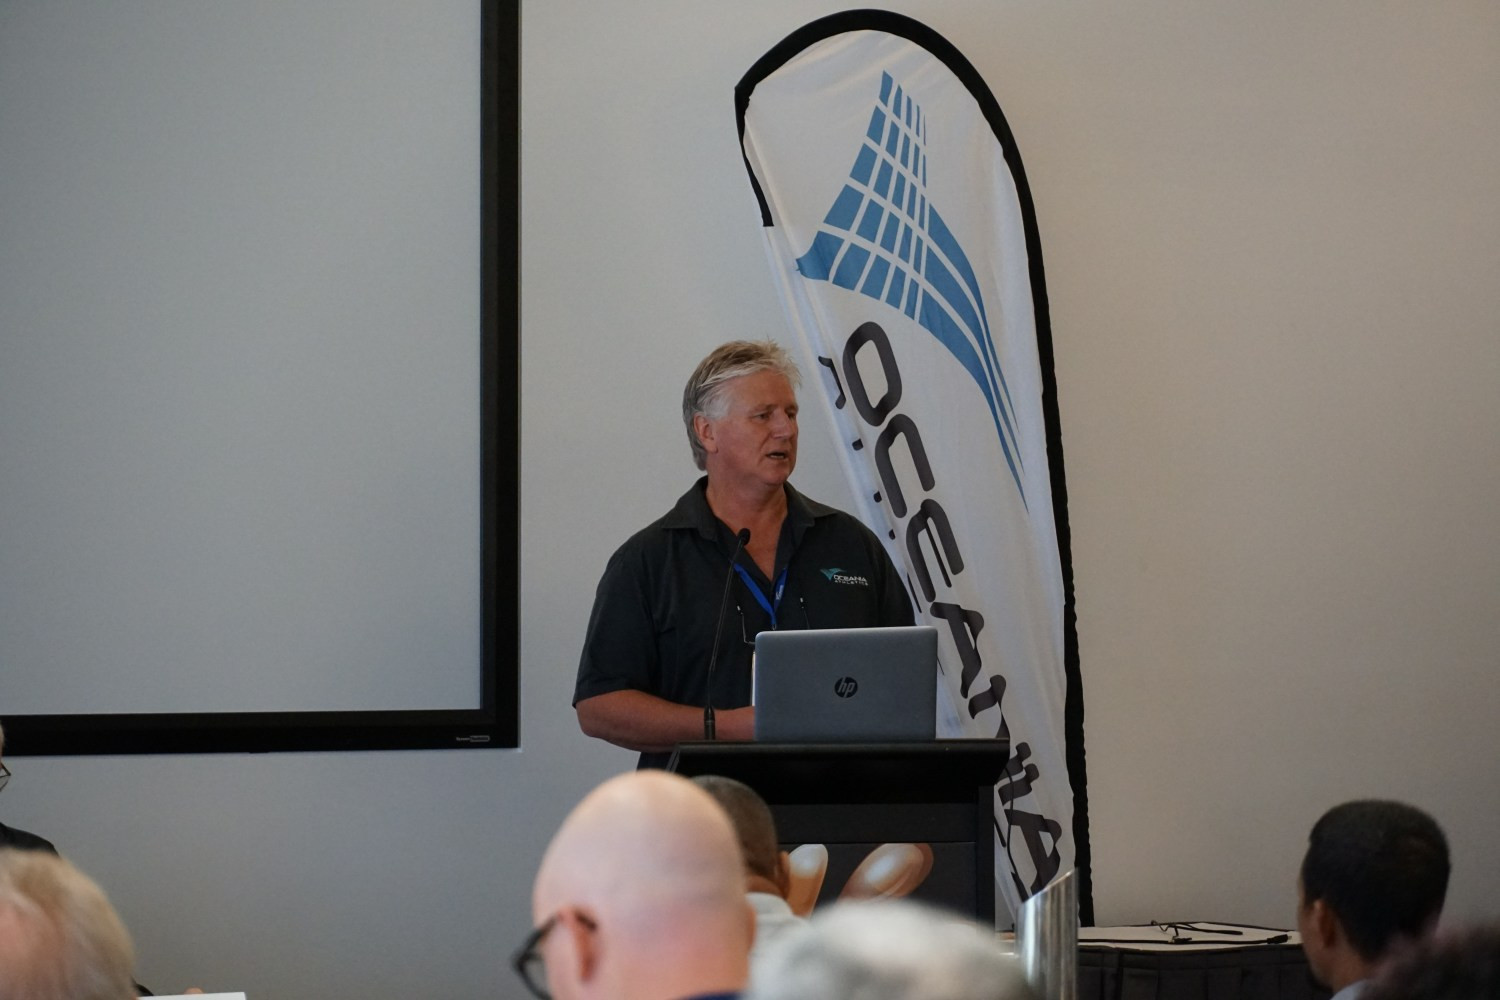 Geoff Gardner was re-elected unopposed for a fourth term as President of the Oceania Athletics Association ©OAA